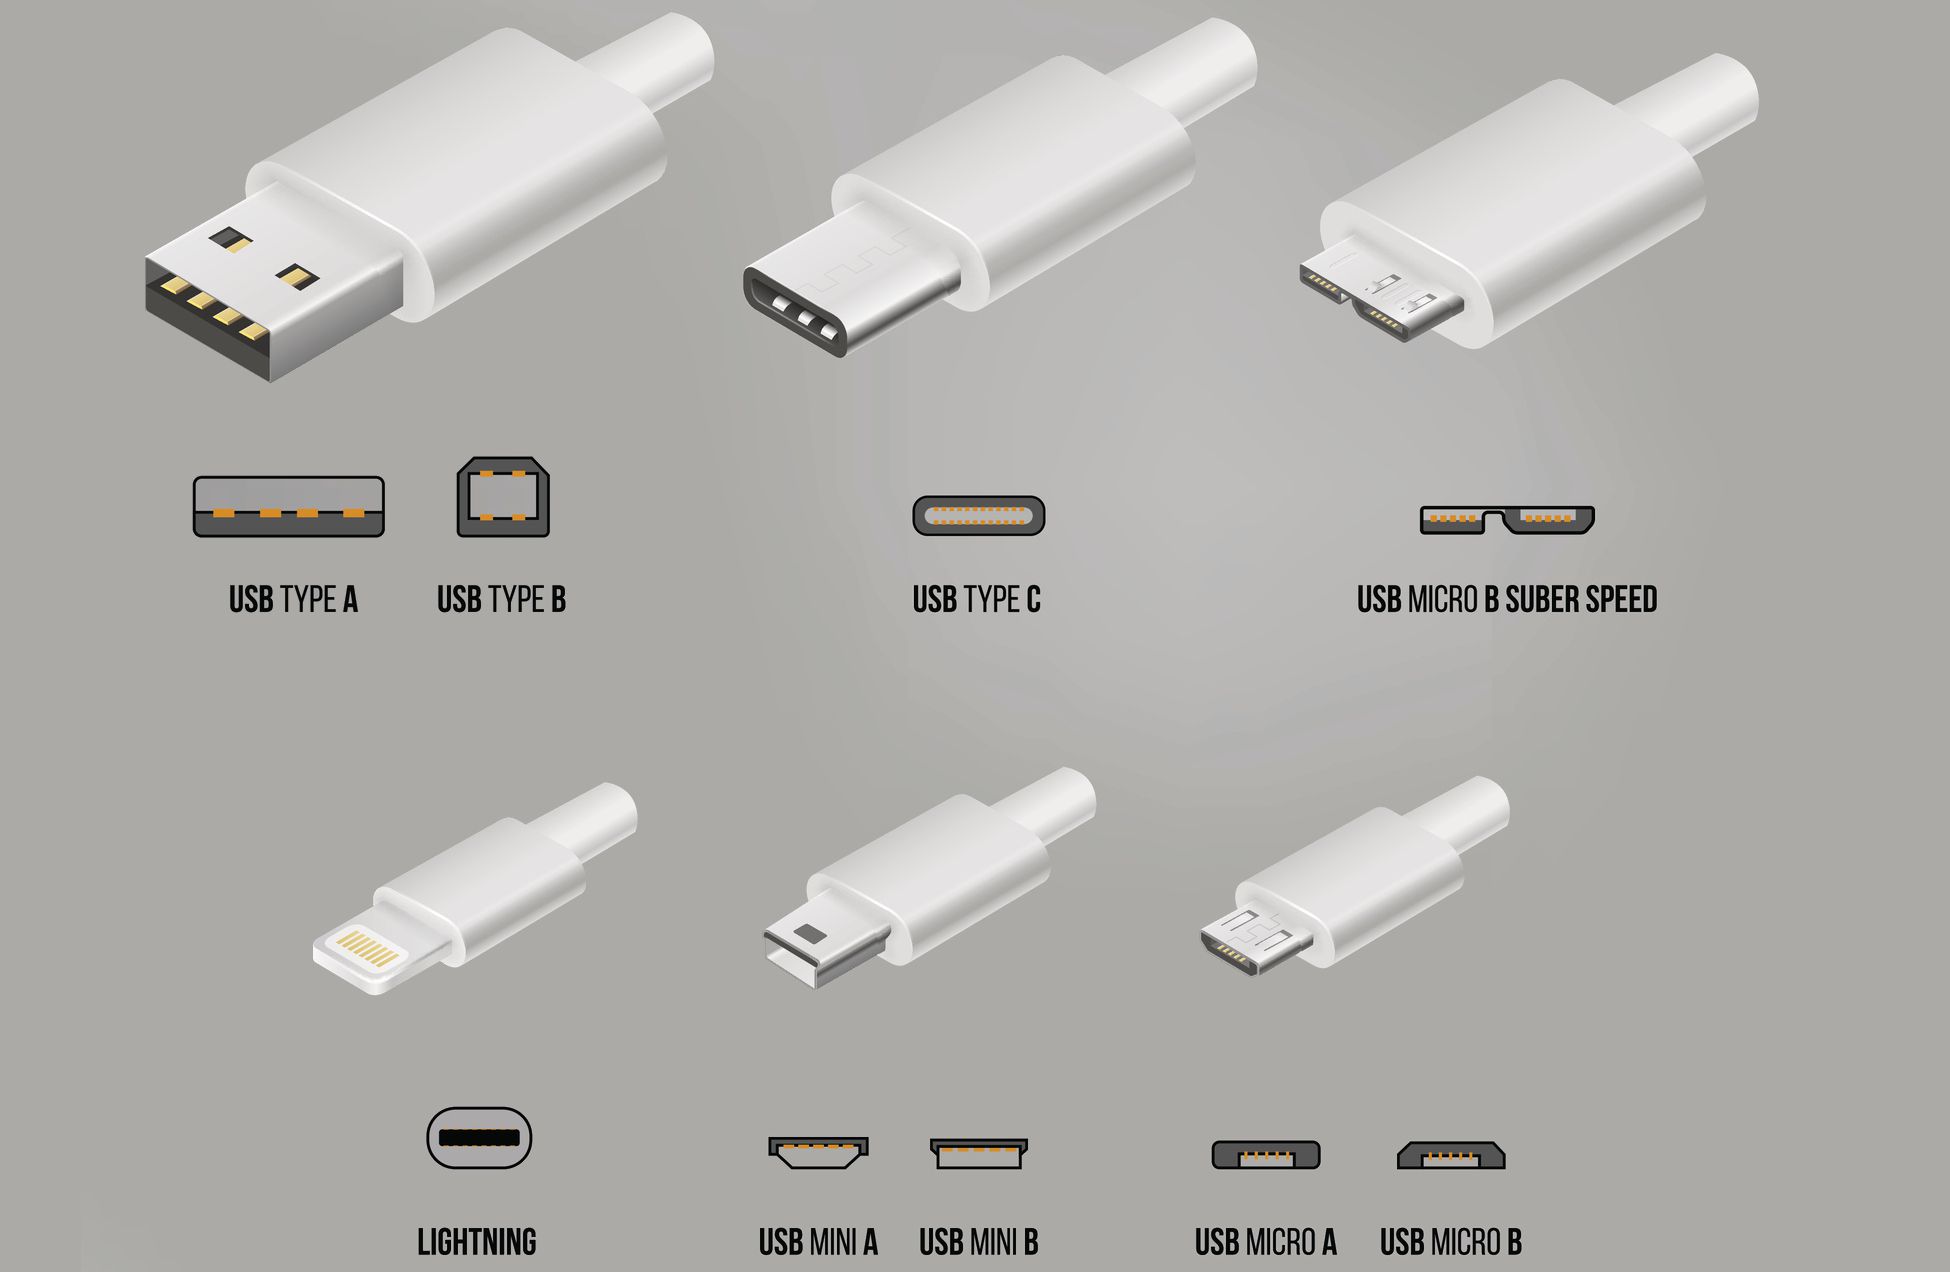 12V USB Adapters - How to Choose the Right One